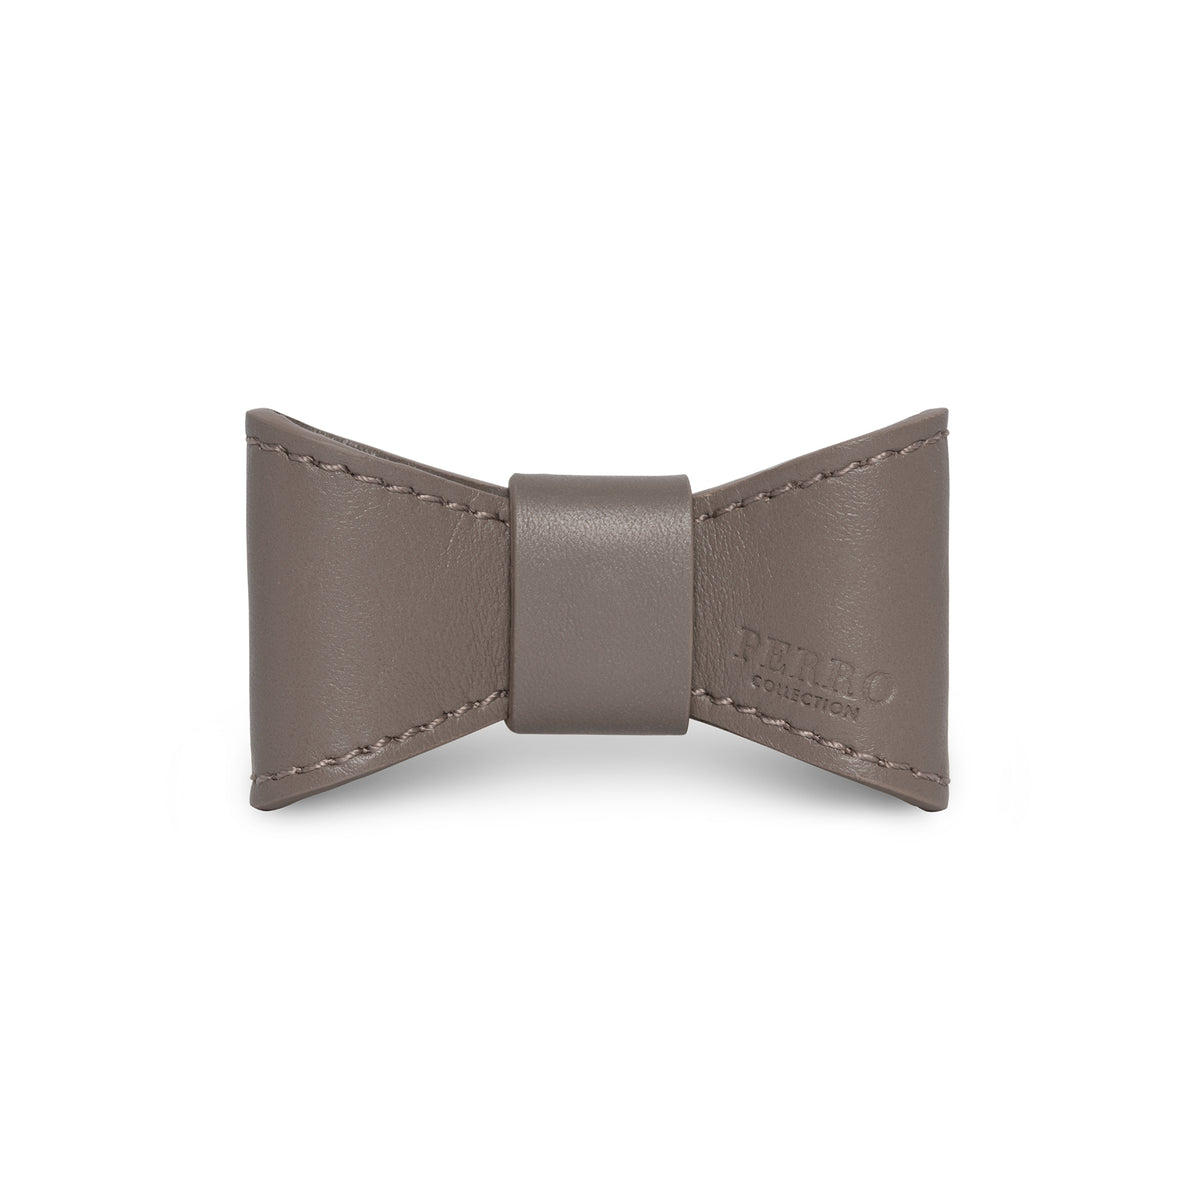 Taupe leather bowtie